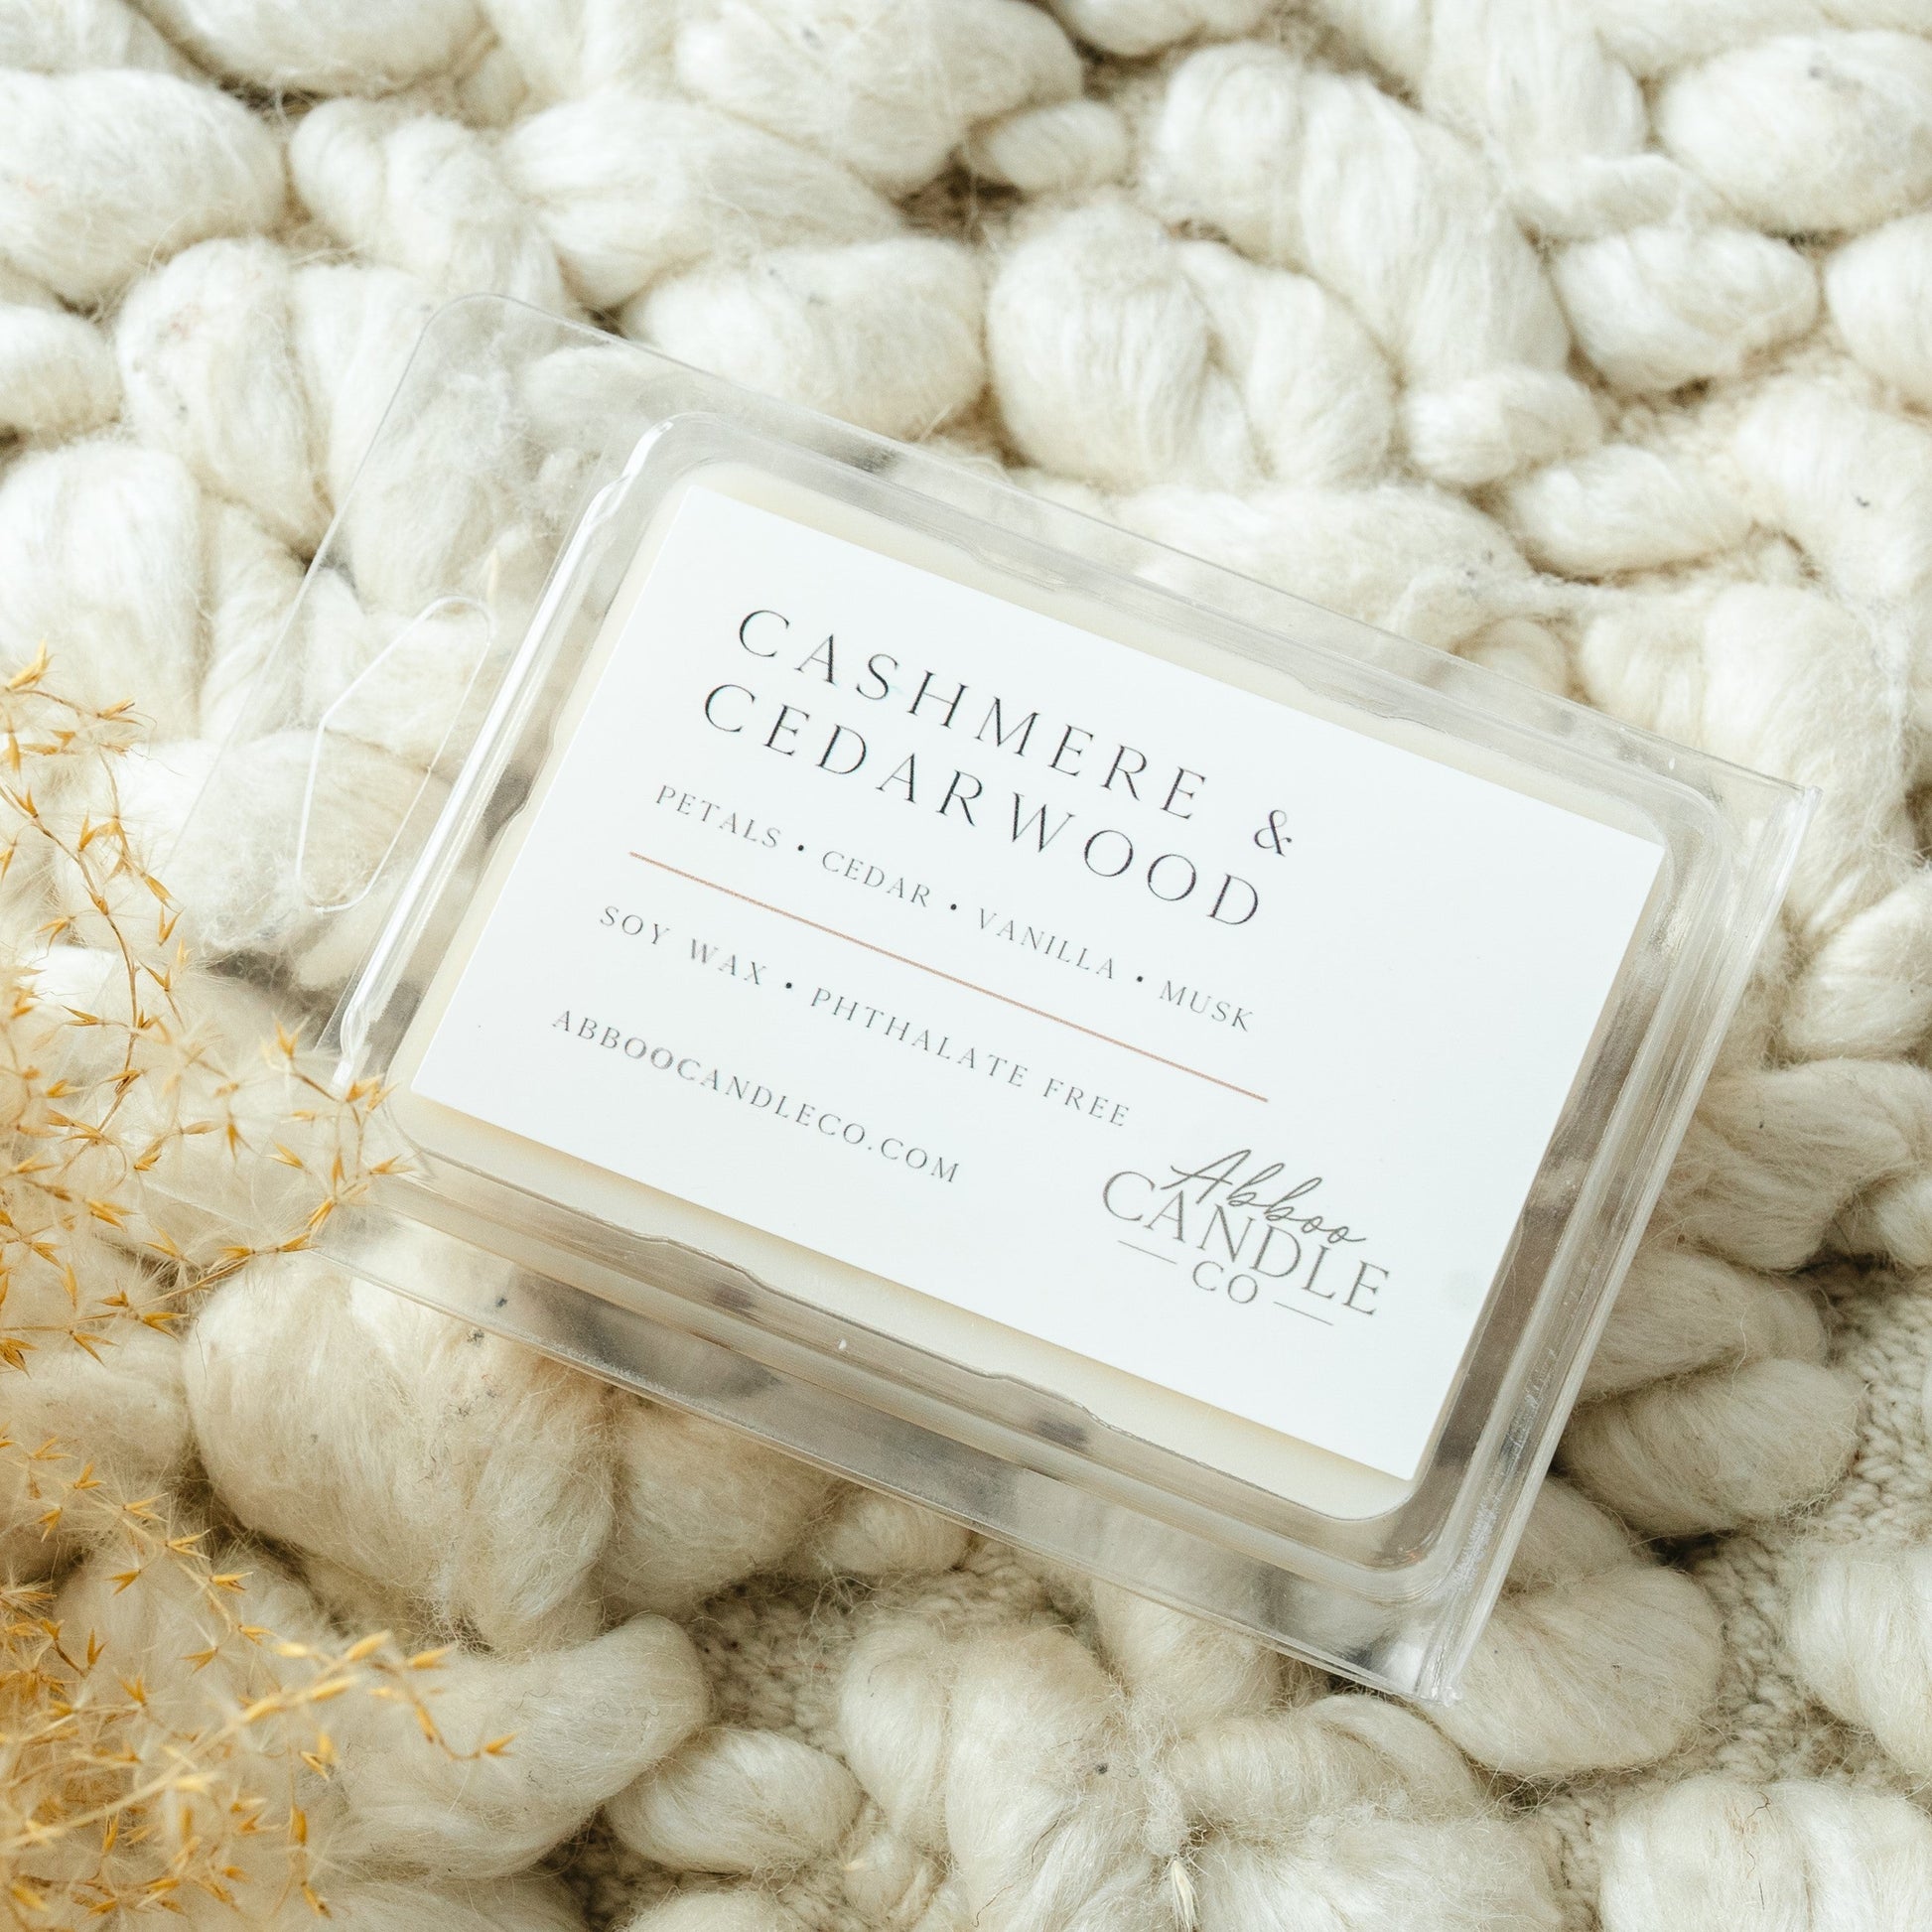 Cashmere and Cedarwood Soy Wax Melts - Abboo Candle Co® Wholesale